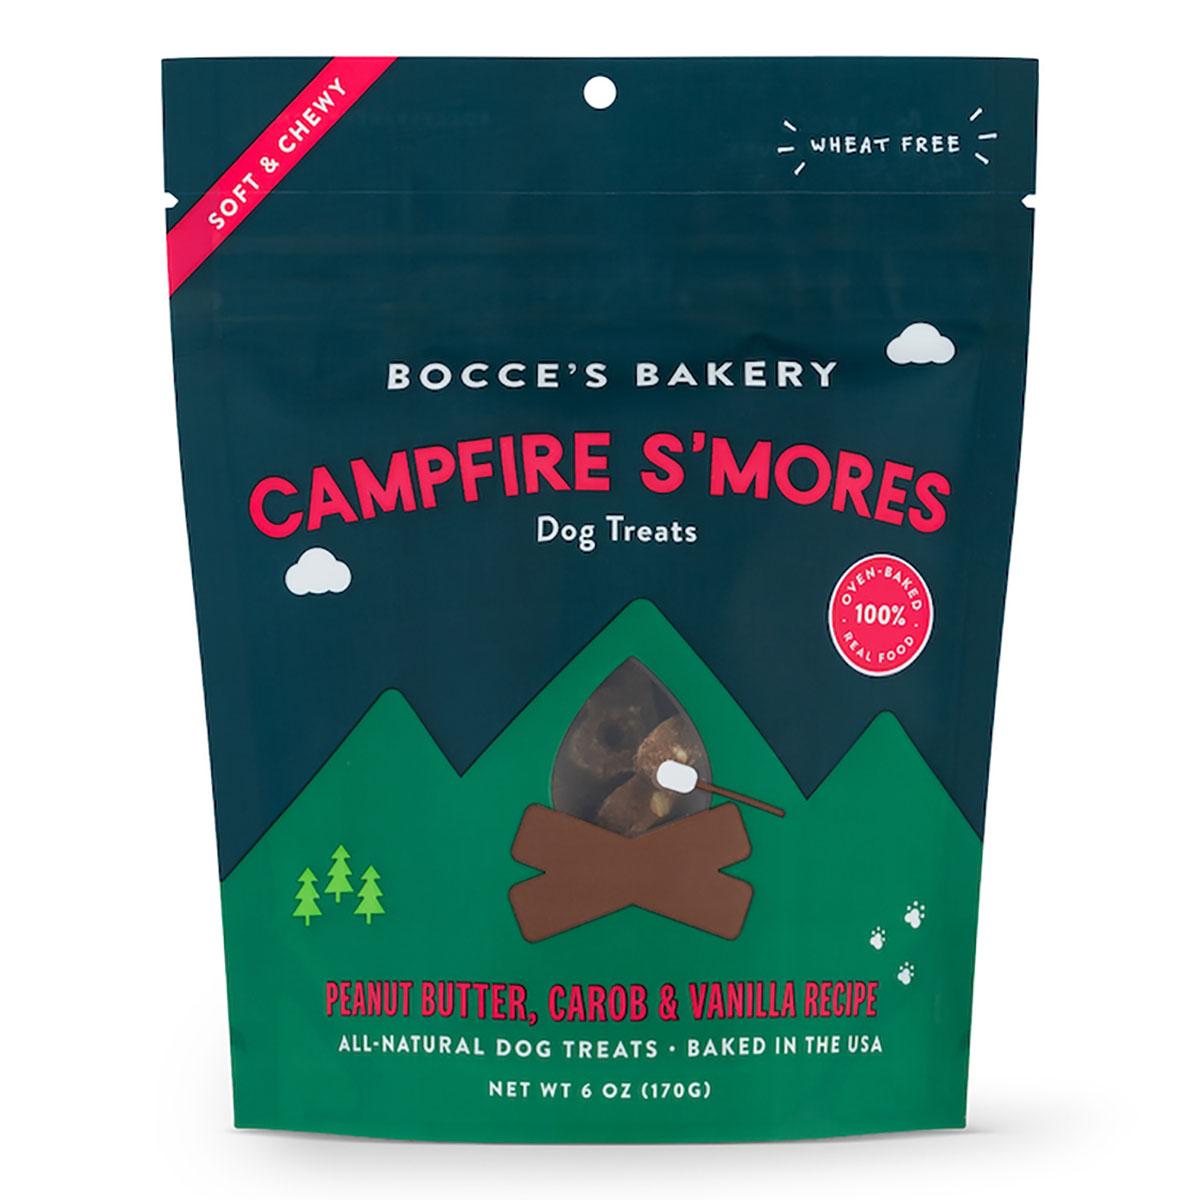 Bocce's Bakery Campfire S'mores Soft & Chewy Dog Treats